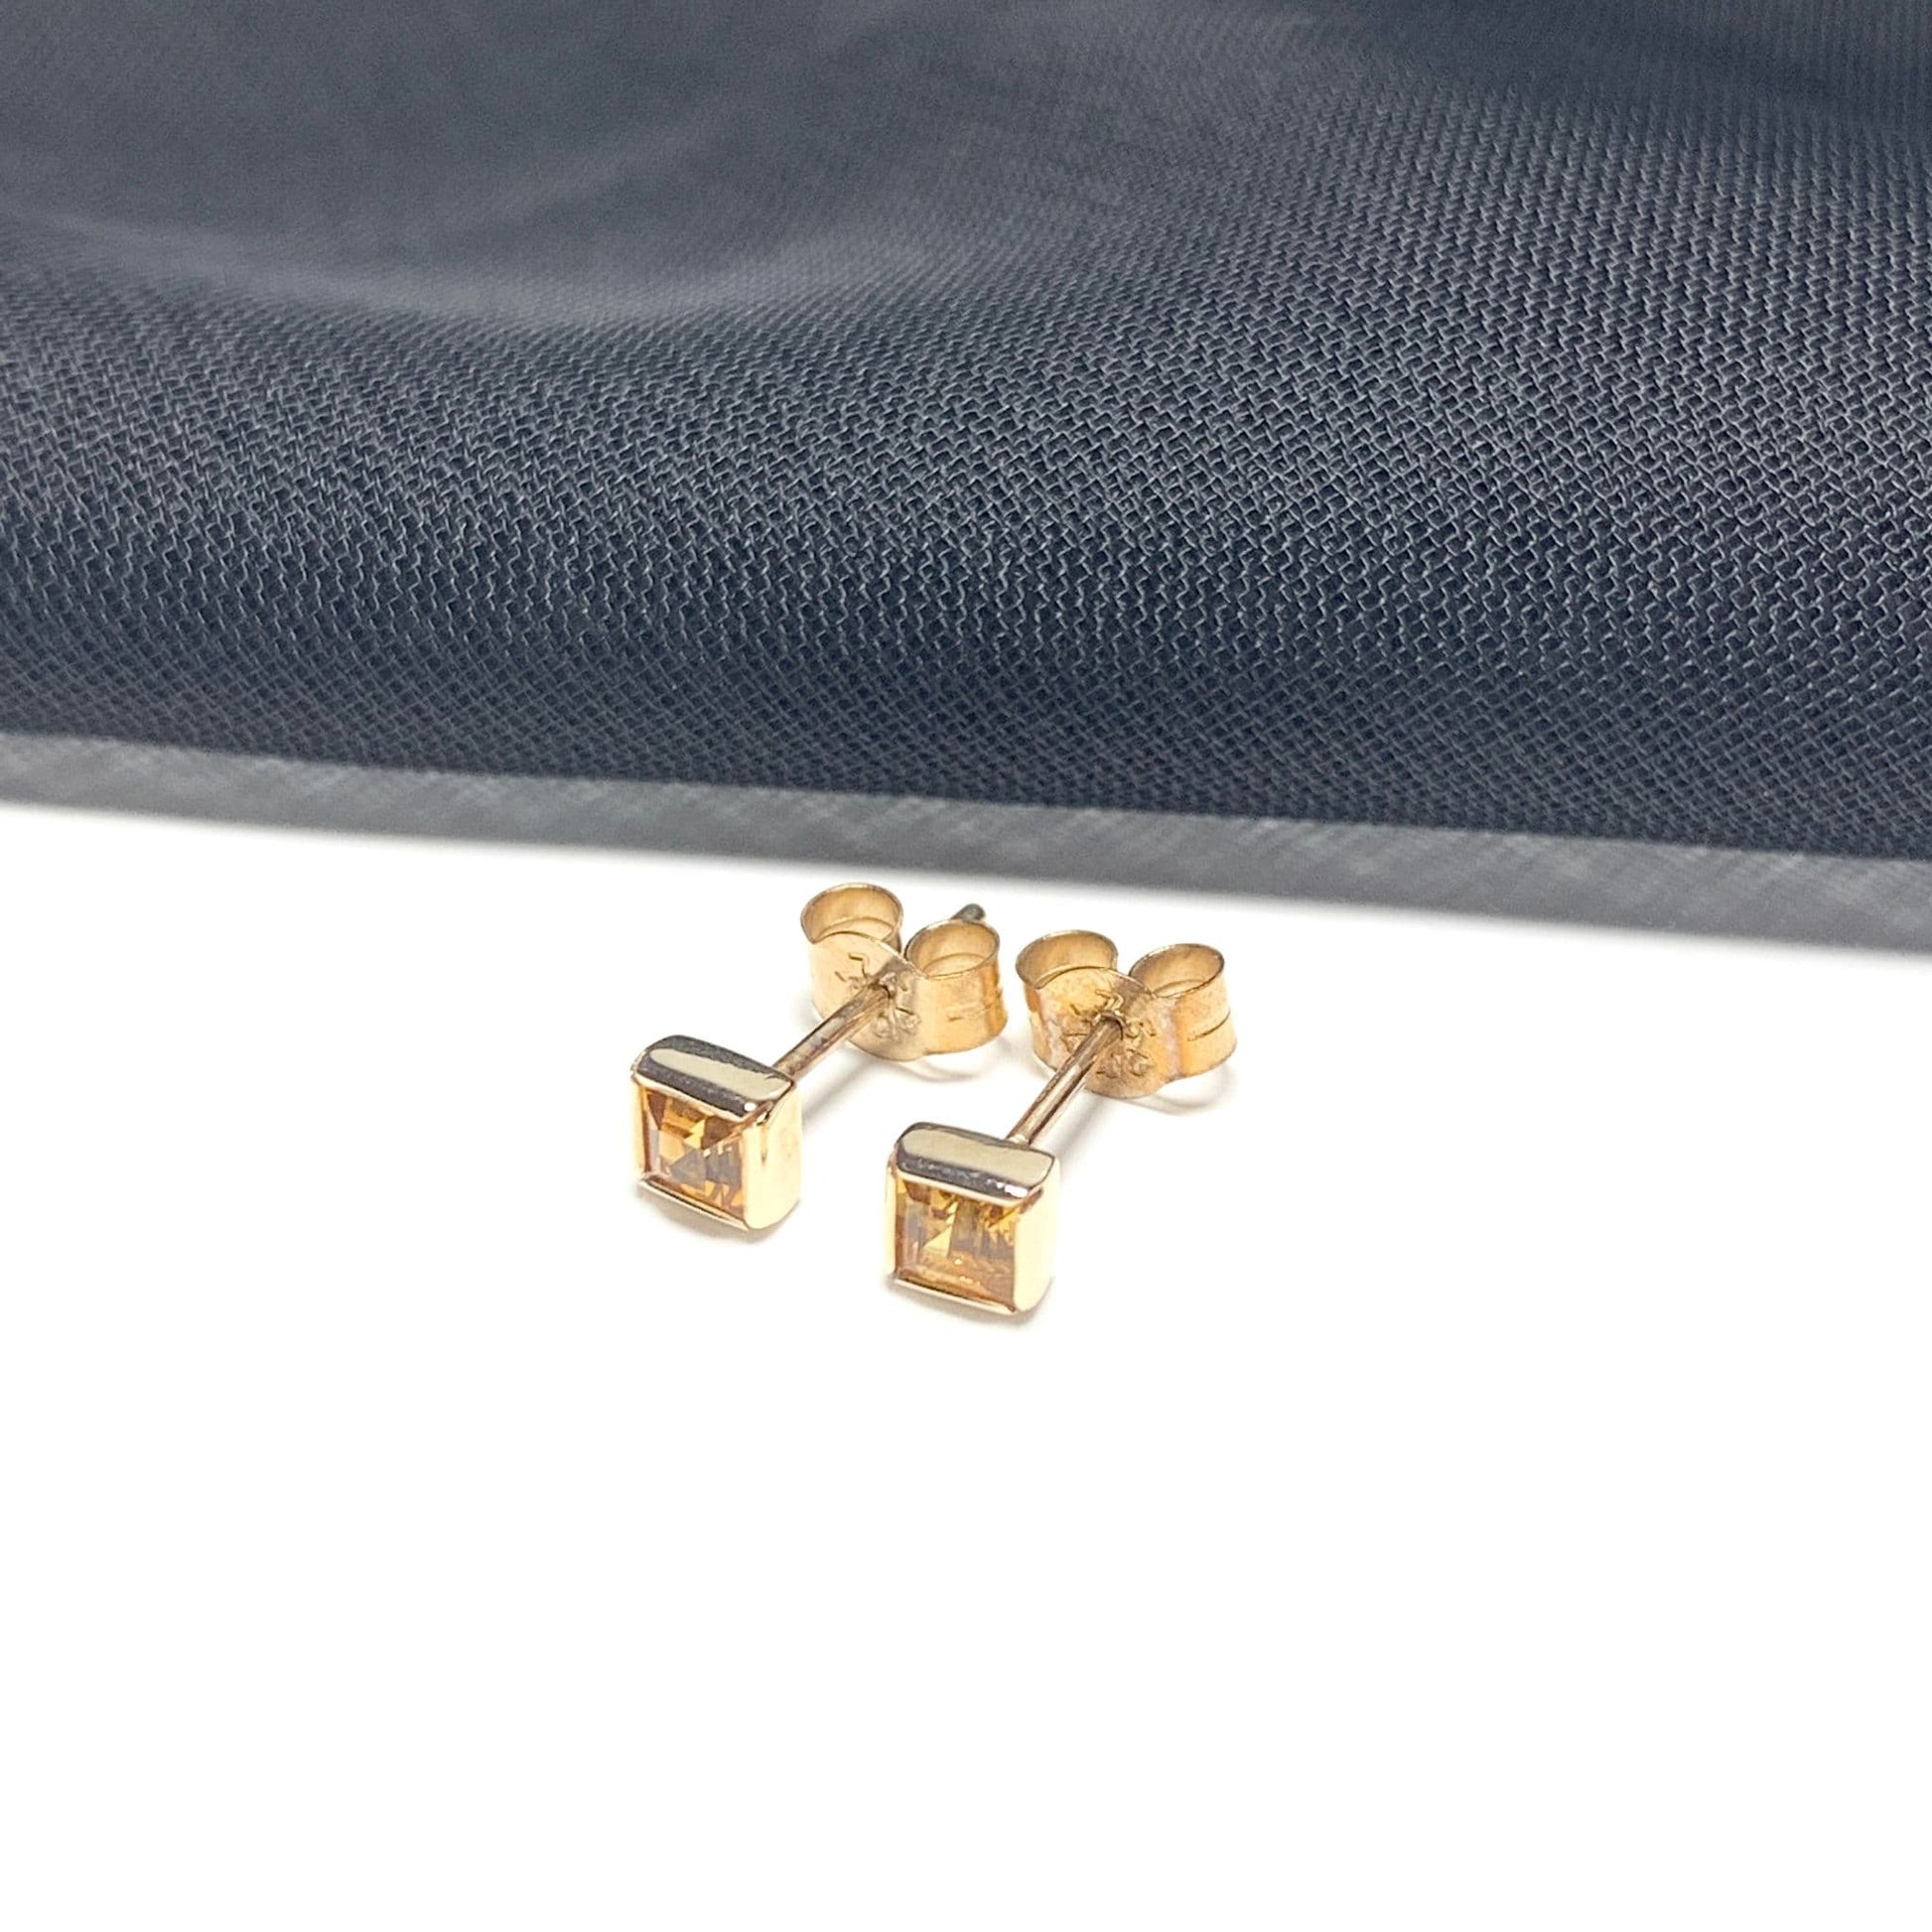 Small square dark yellow citrine gold earrings